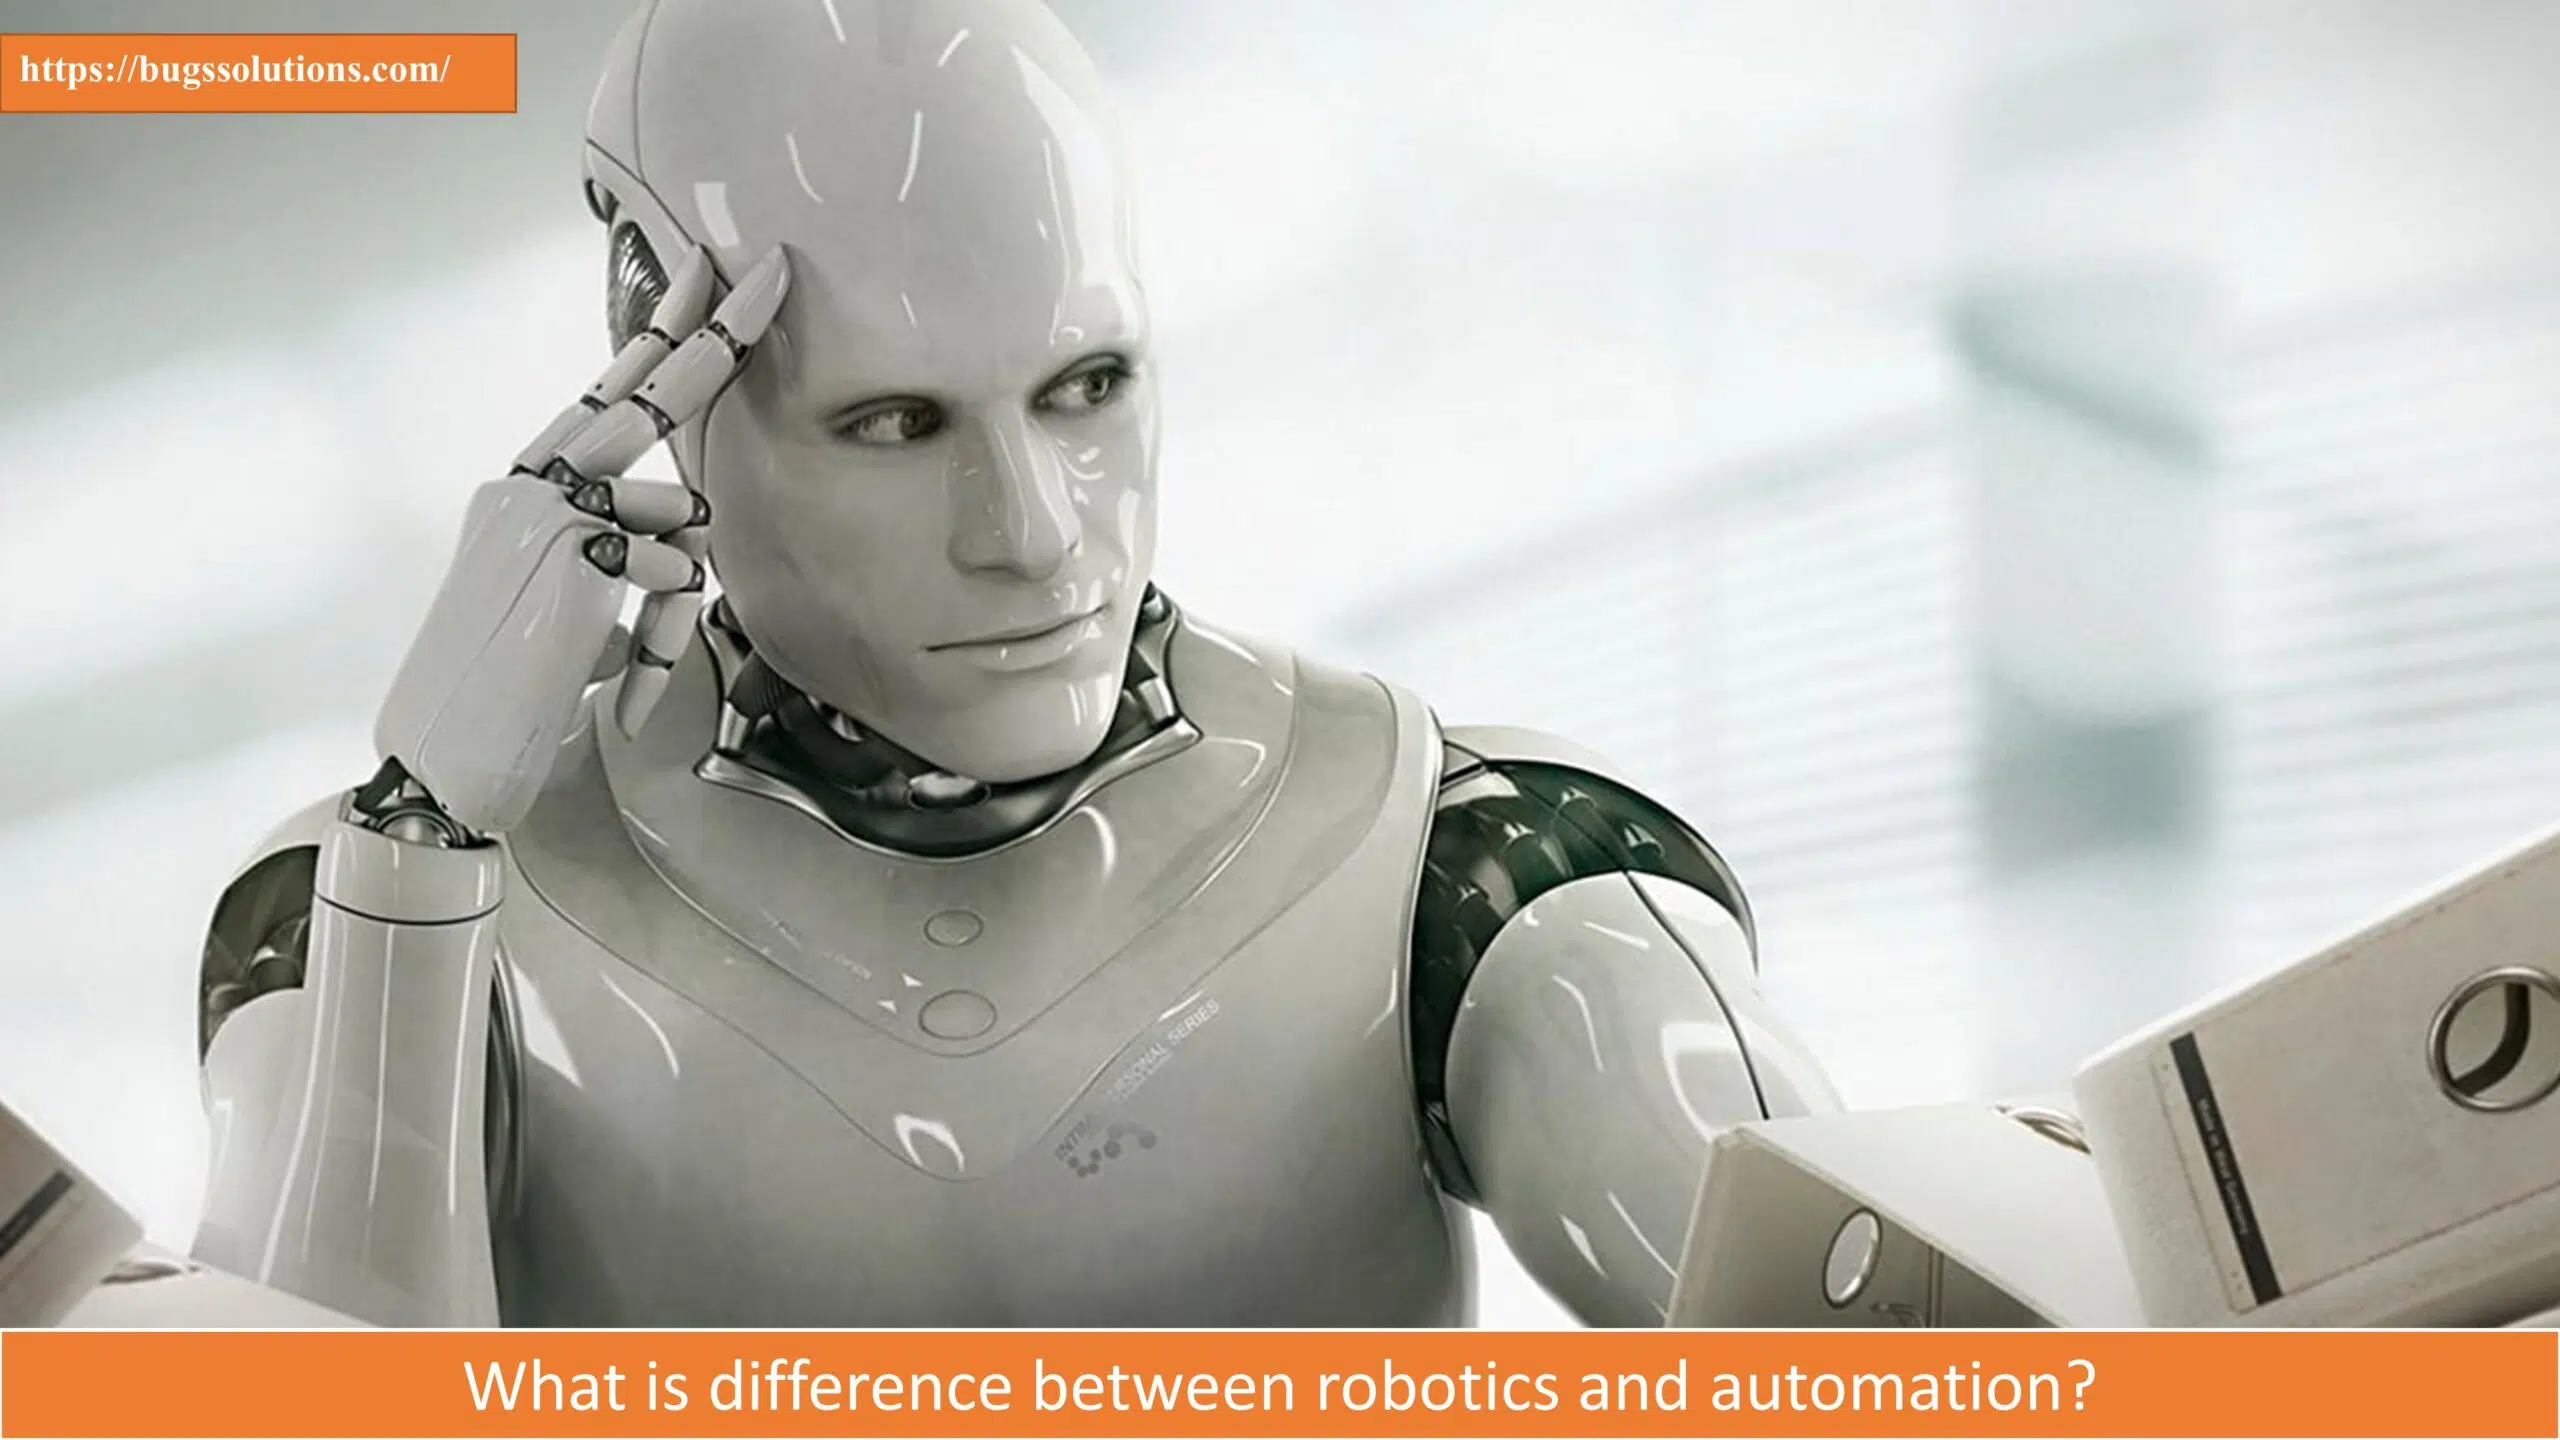 What is difference between robotics and automation?